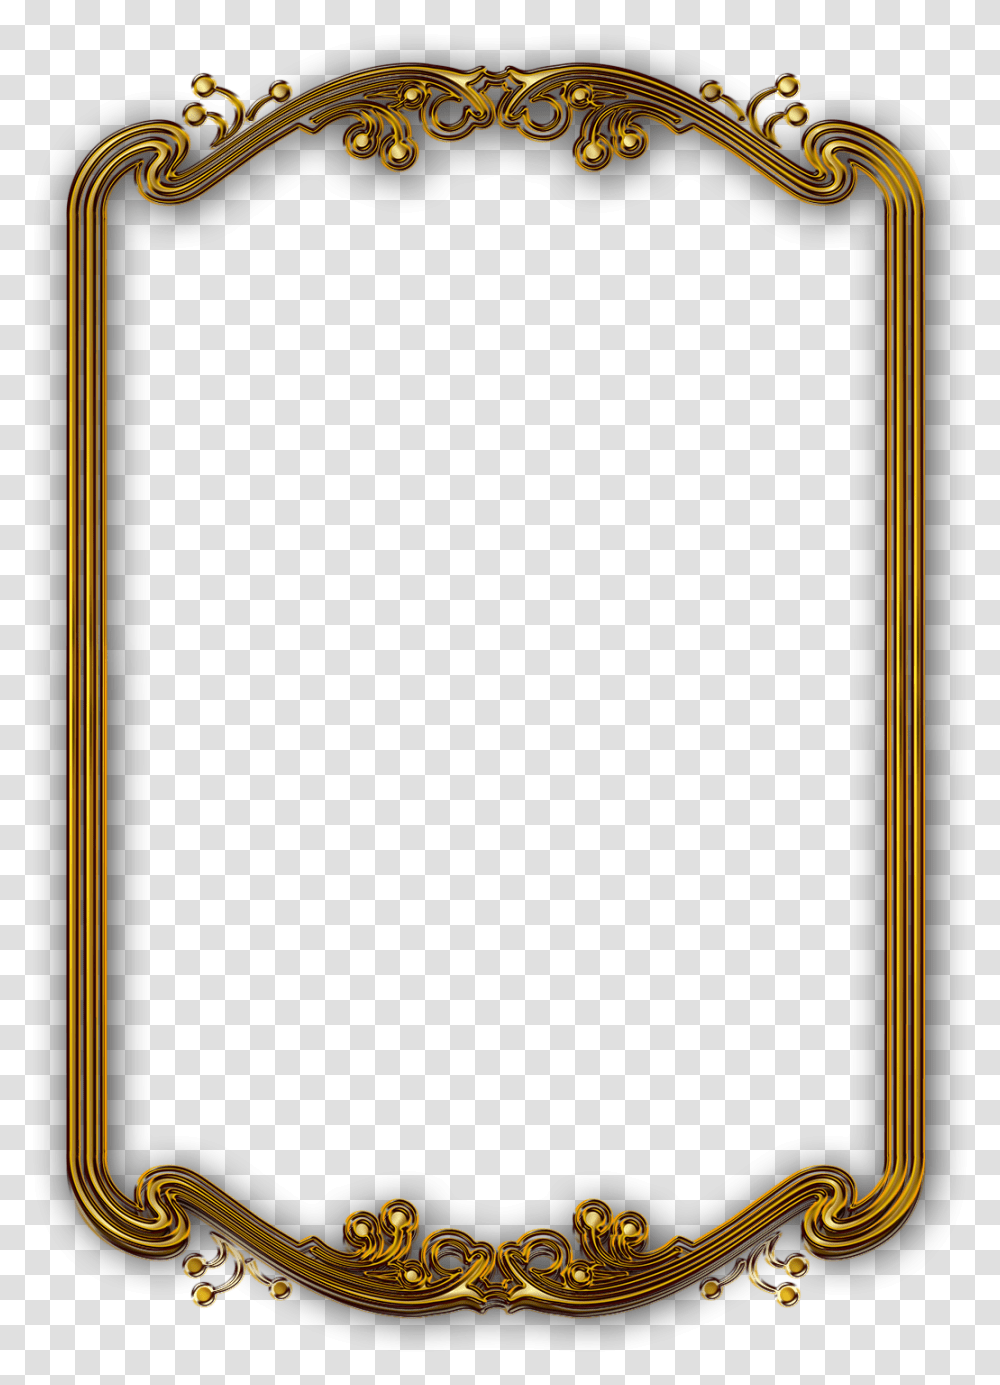 Gold Picture Frame Line Classical Free Clipart Hd Clipart Photo Frame, Electronics, Screen, Monitor Transparent Png